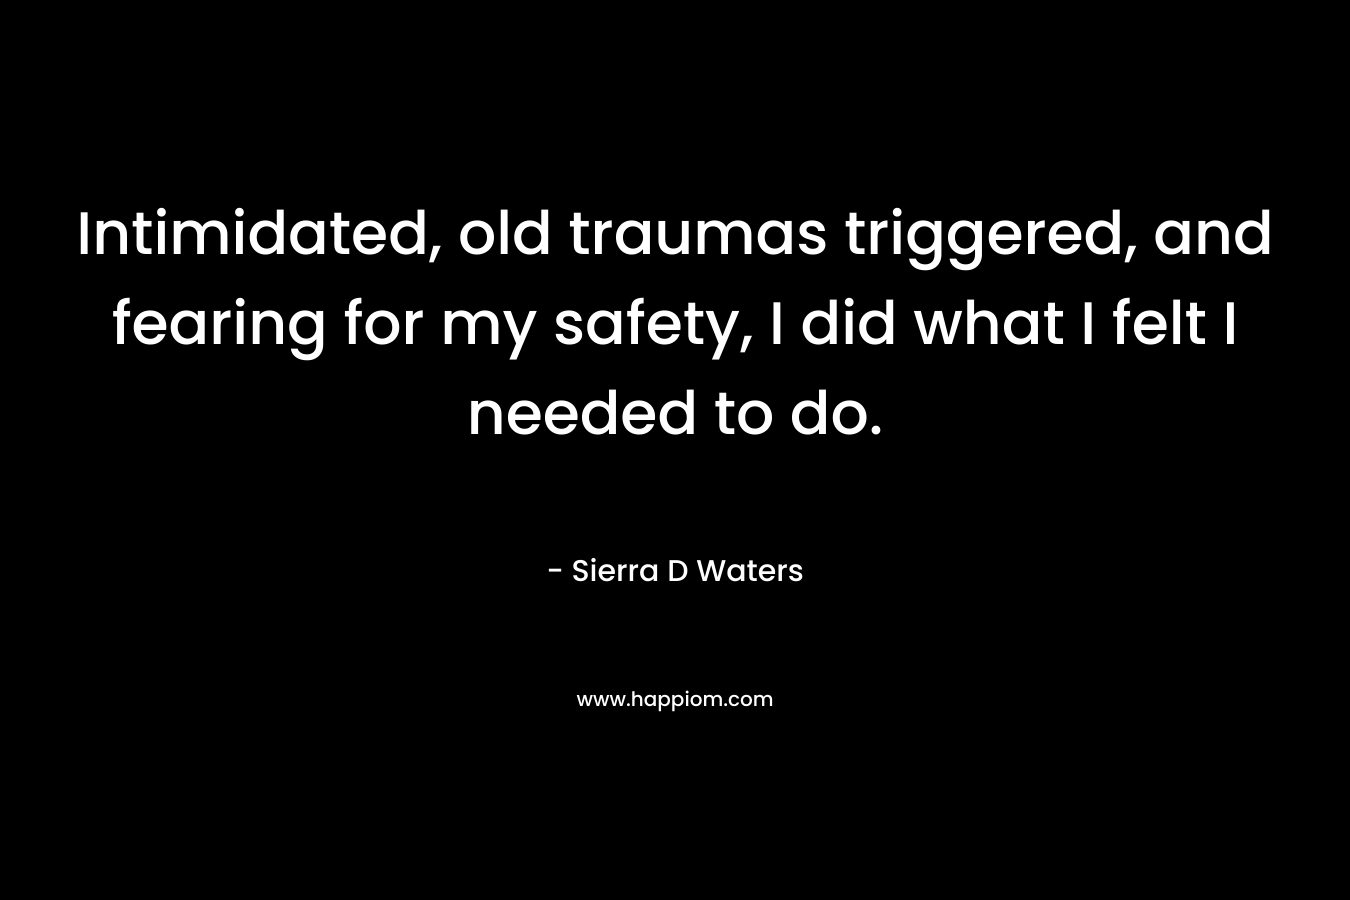 Intimidated, old traumas triggered, and fearing for my safety, I did what I felt I needed to do. – Sierra D Waters